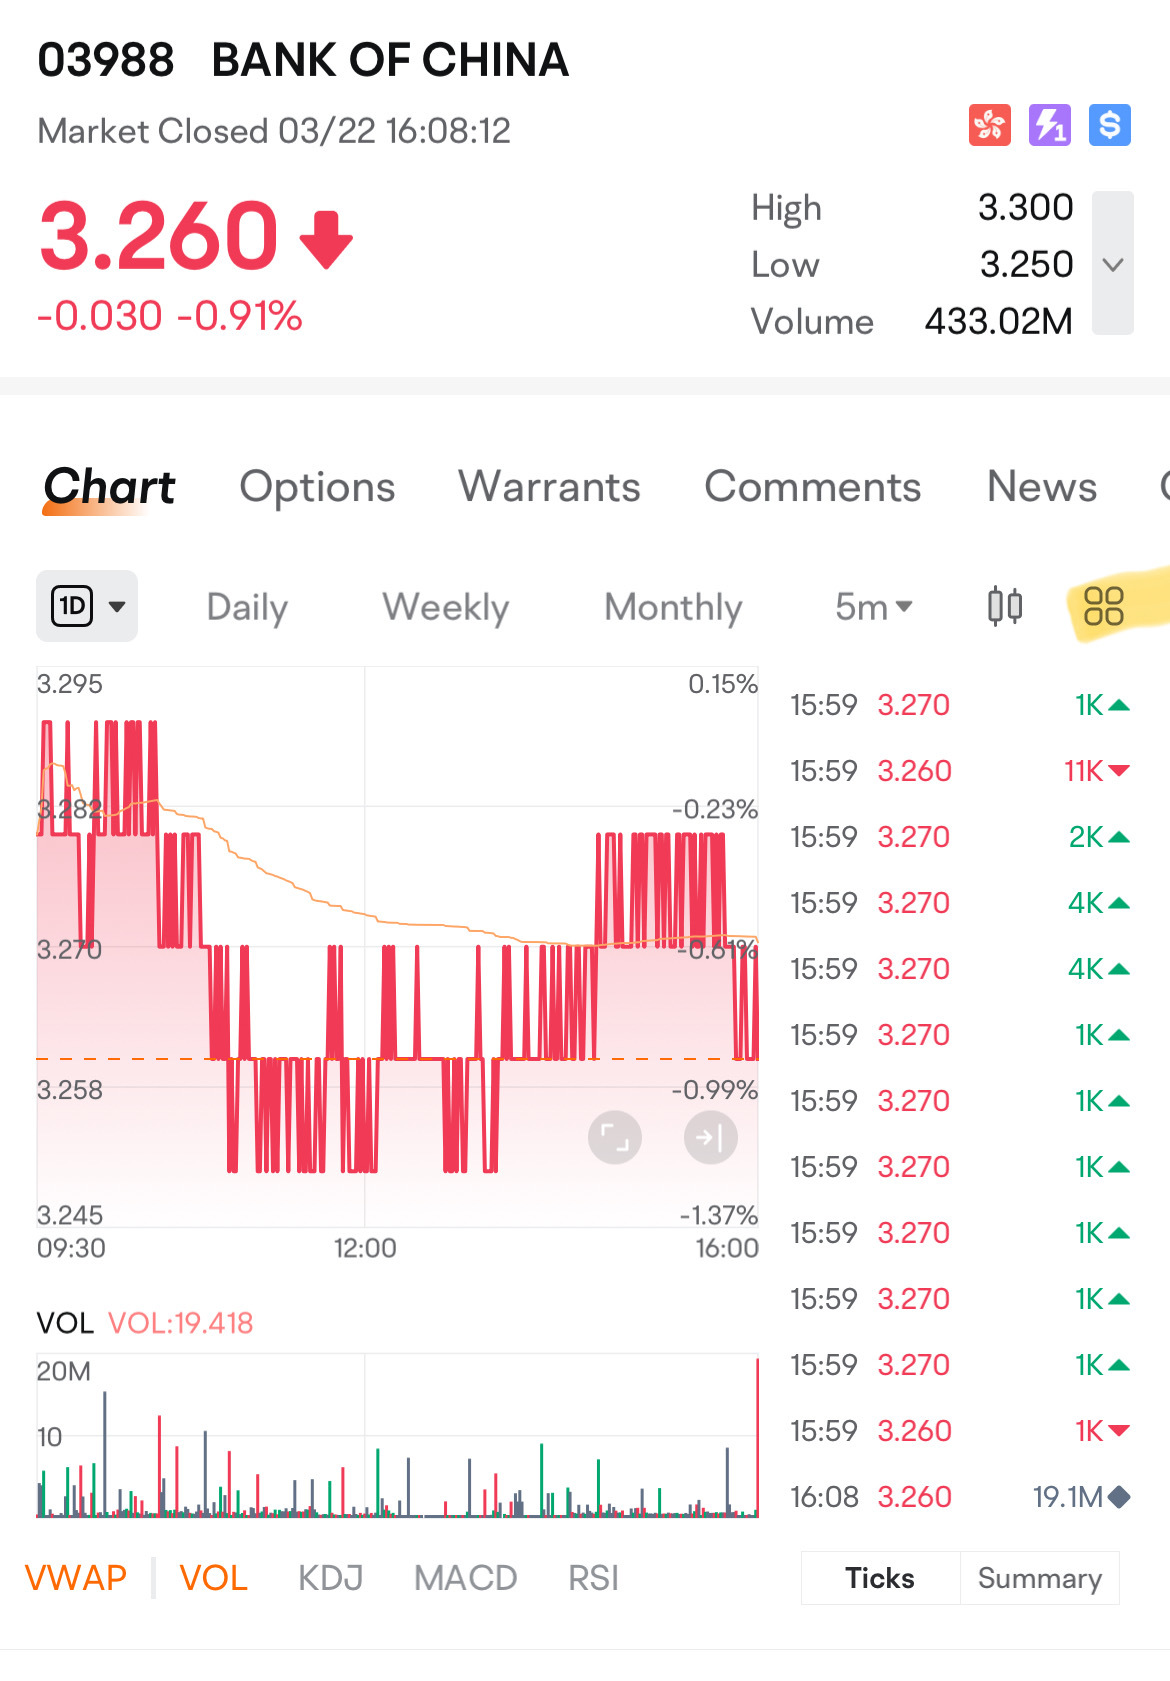 FAQ: Why does the chart in Moomoo show different prices from Yahoo Finance?